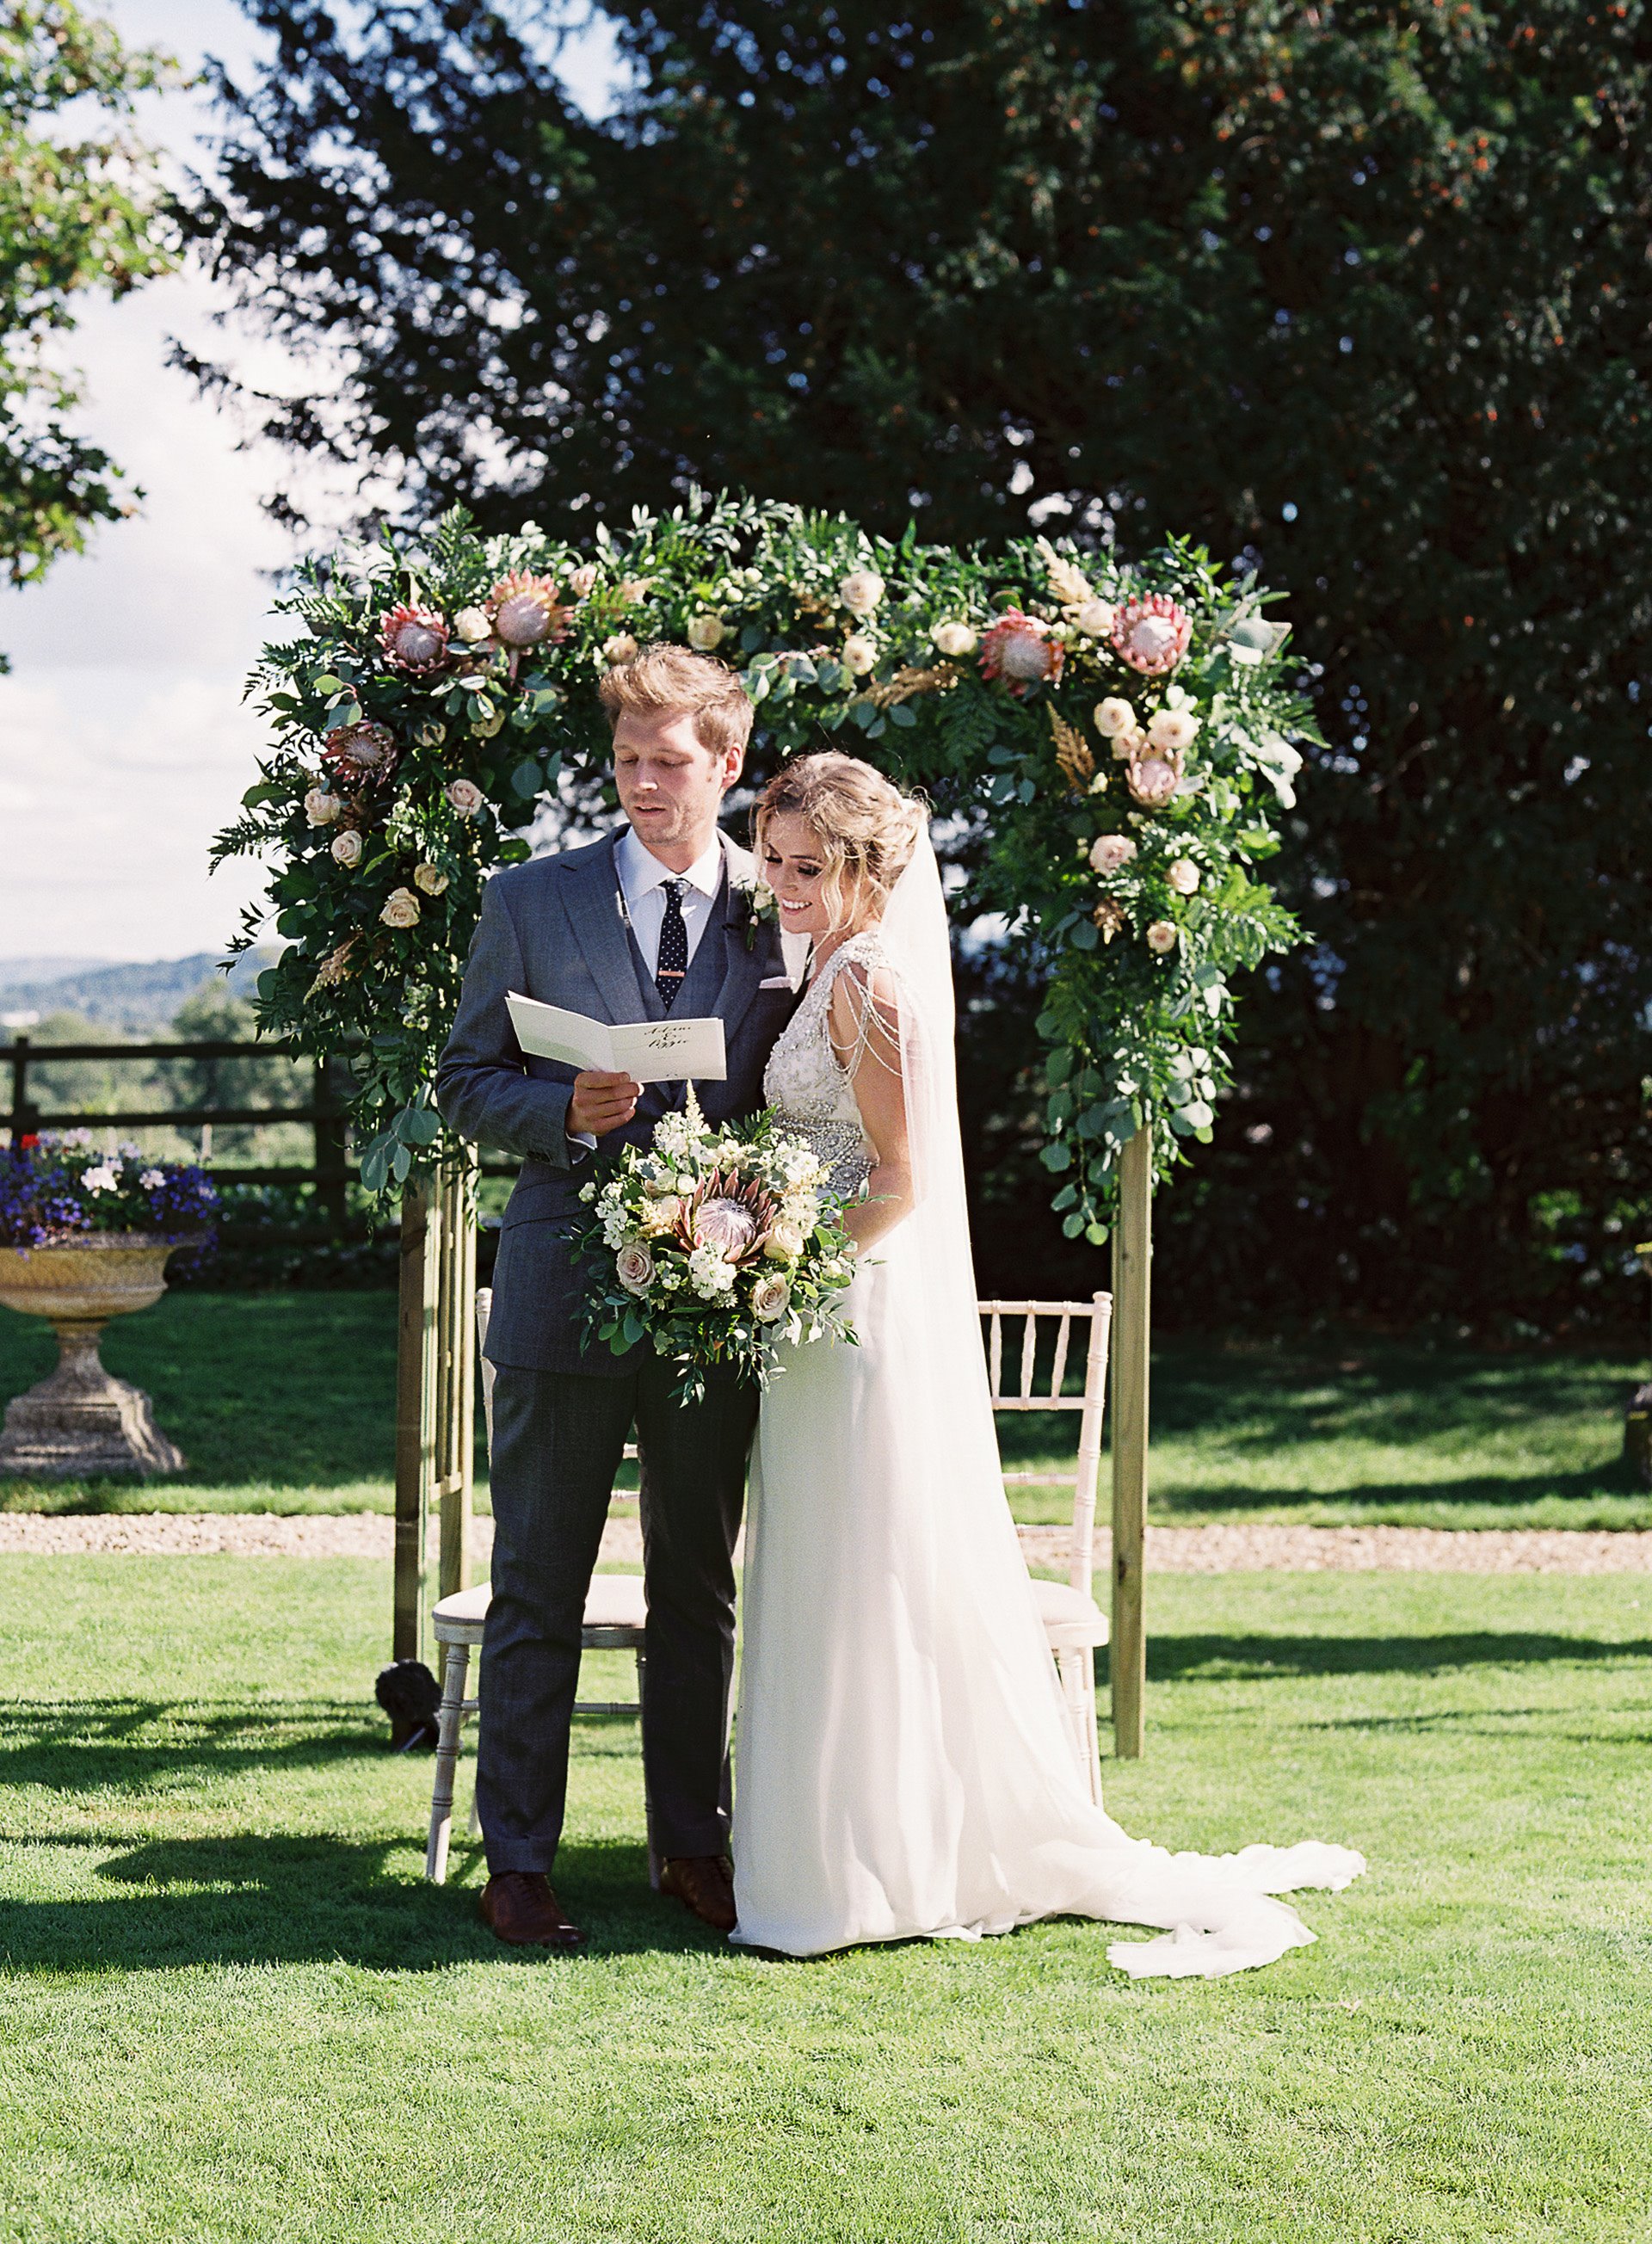 Rock my wedding founders at their outdoor wedding at Elmore Court in the UK